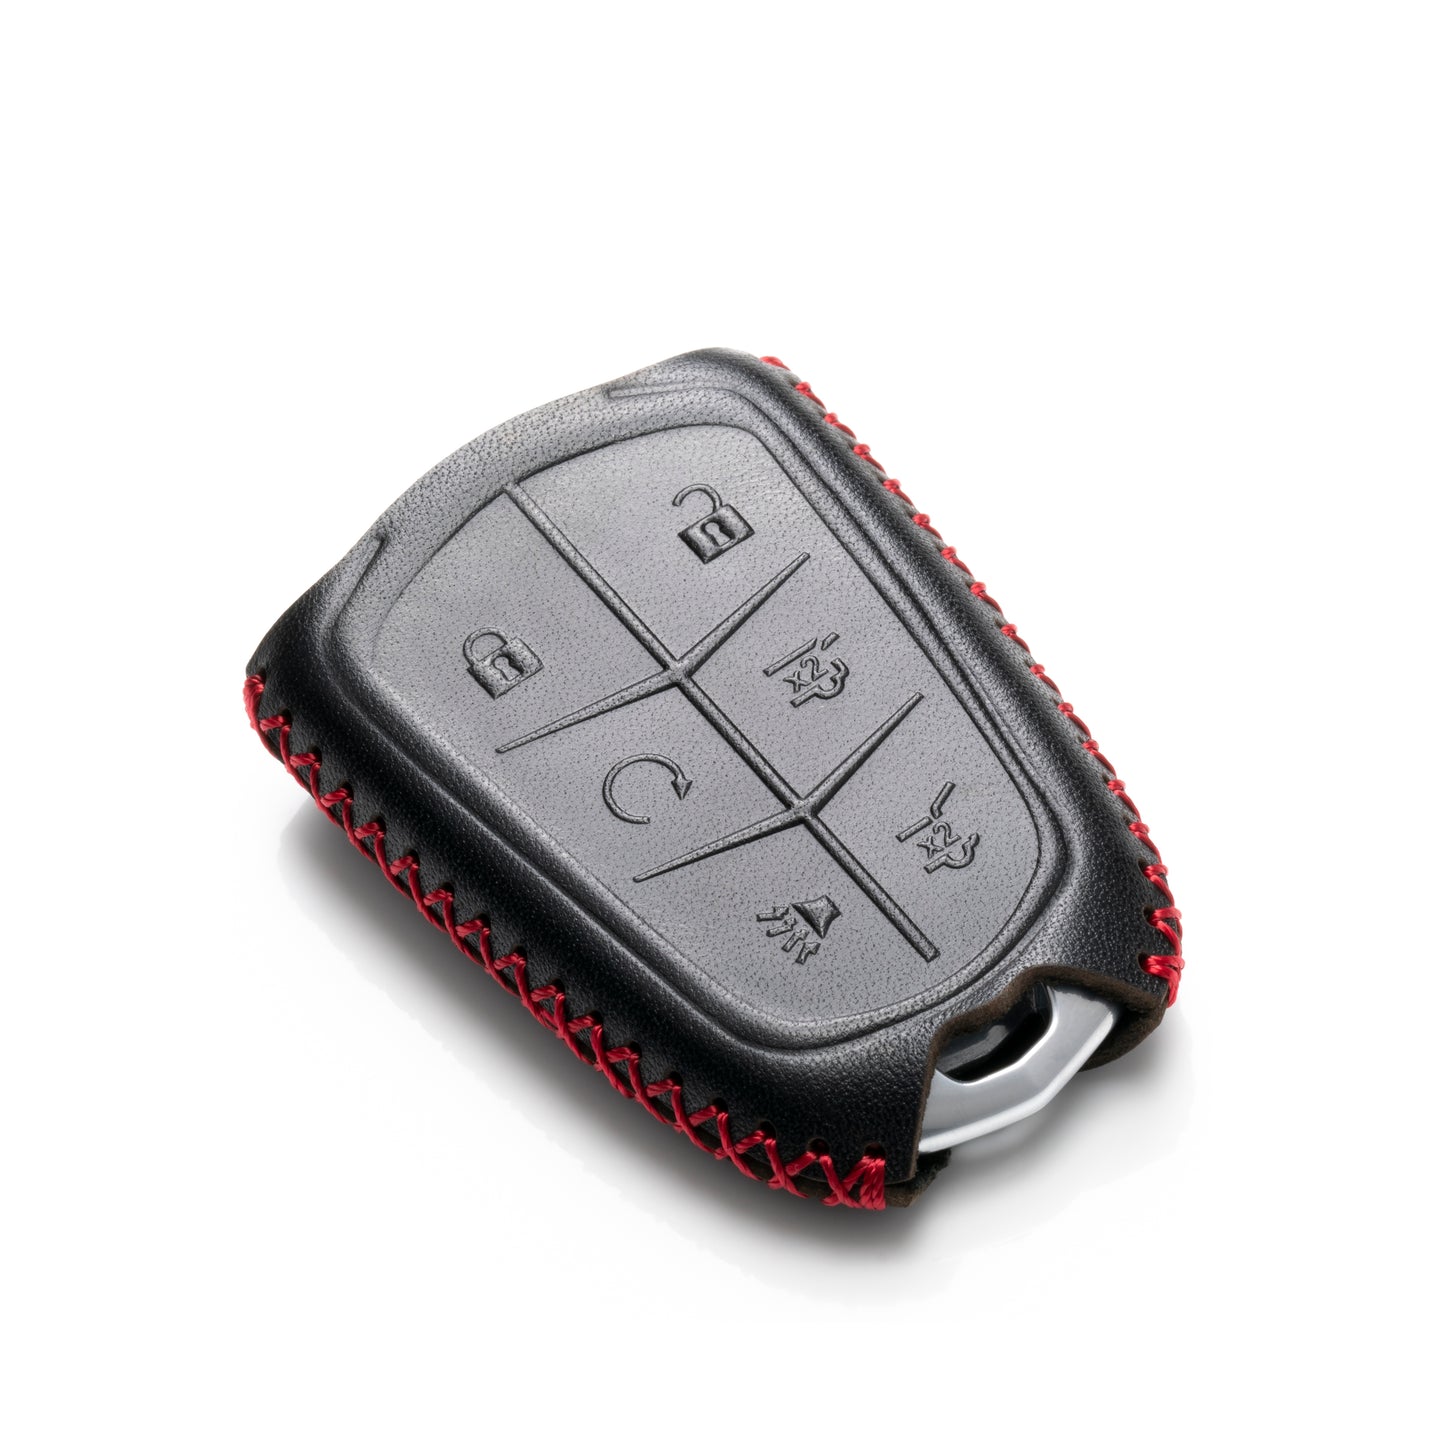 Vitodeco 6-Button Genuine Leather Smart Key Fob Case Cover Compatible for Cadillac ATS, CT6, CTS, SRX, XT5, XTS